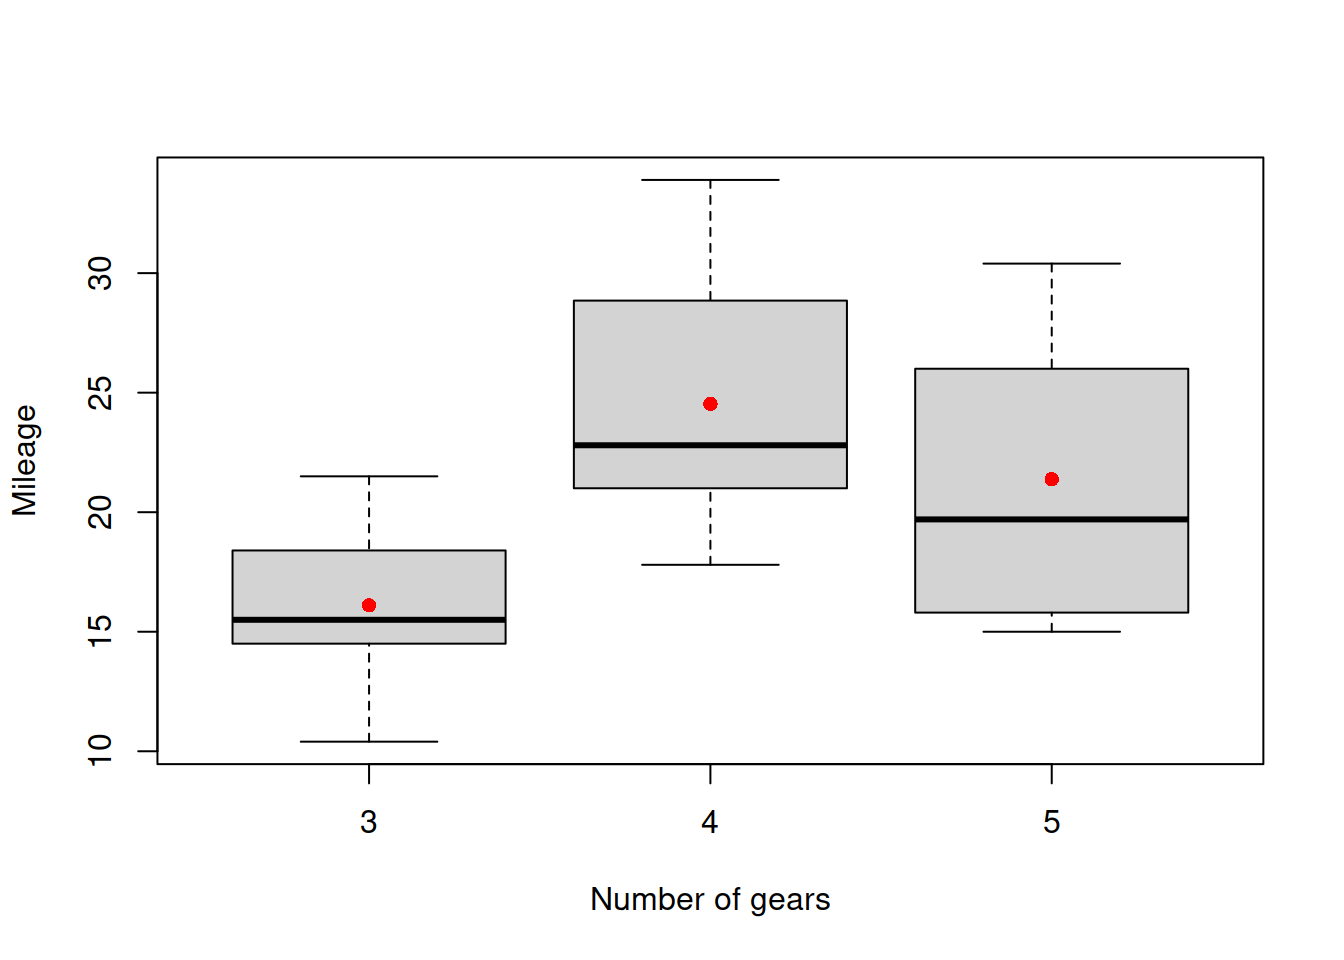 Boxplot of mileage vs number of gears.